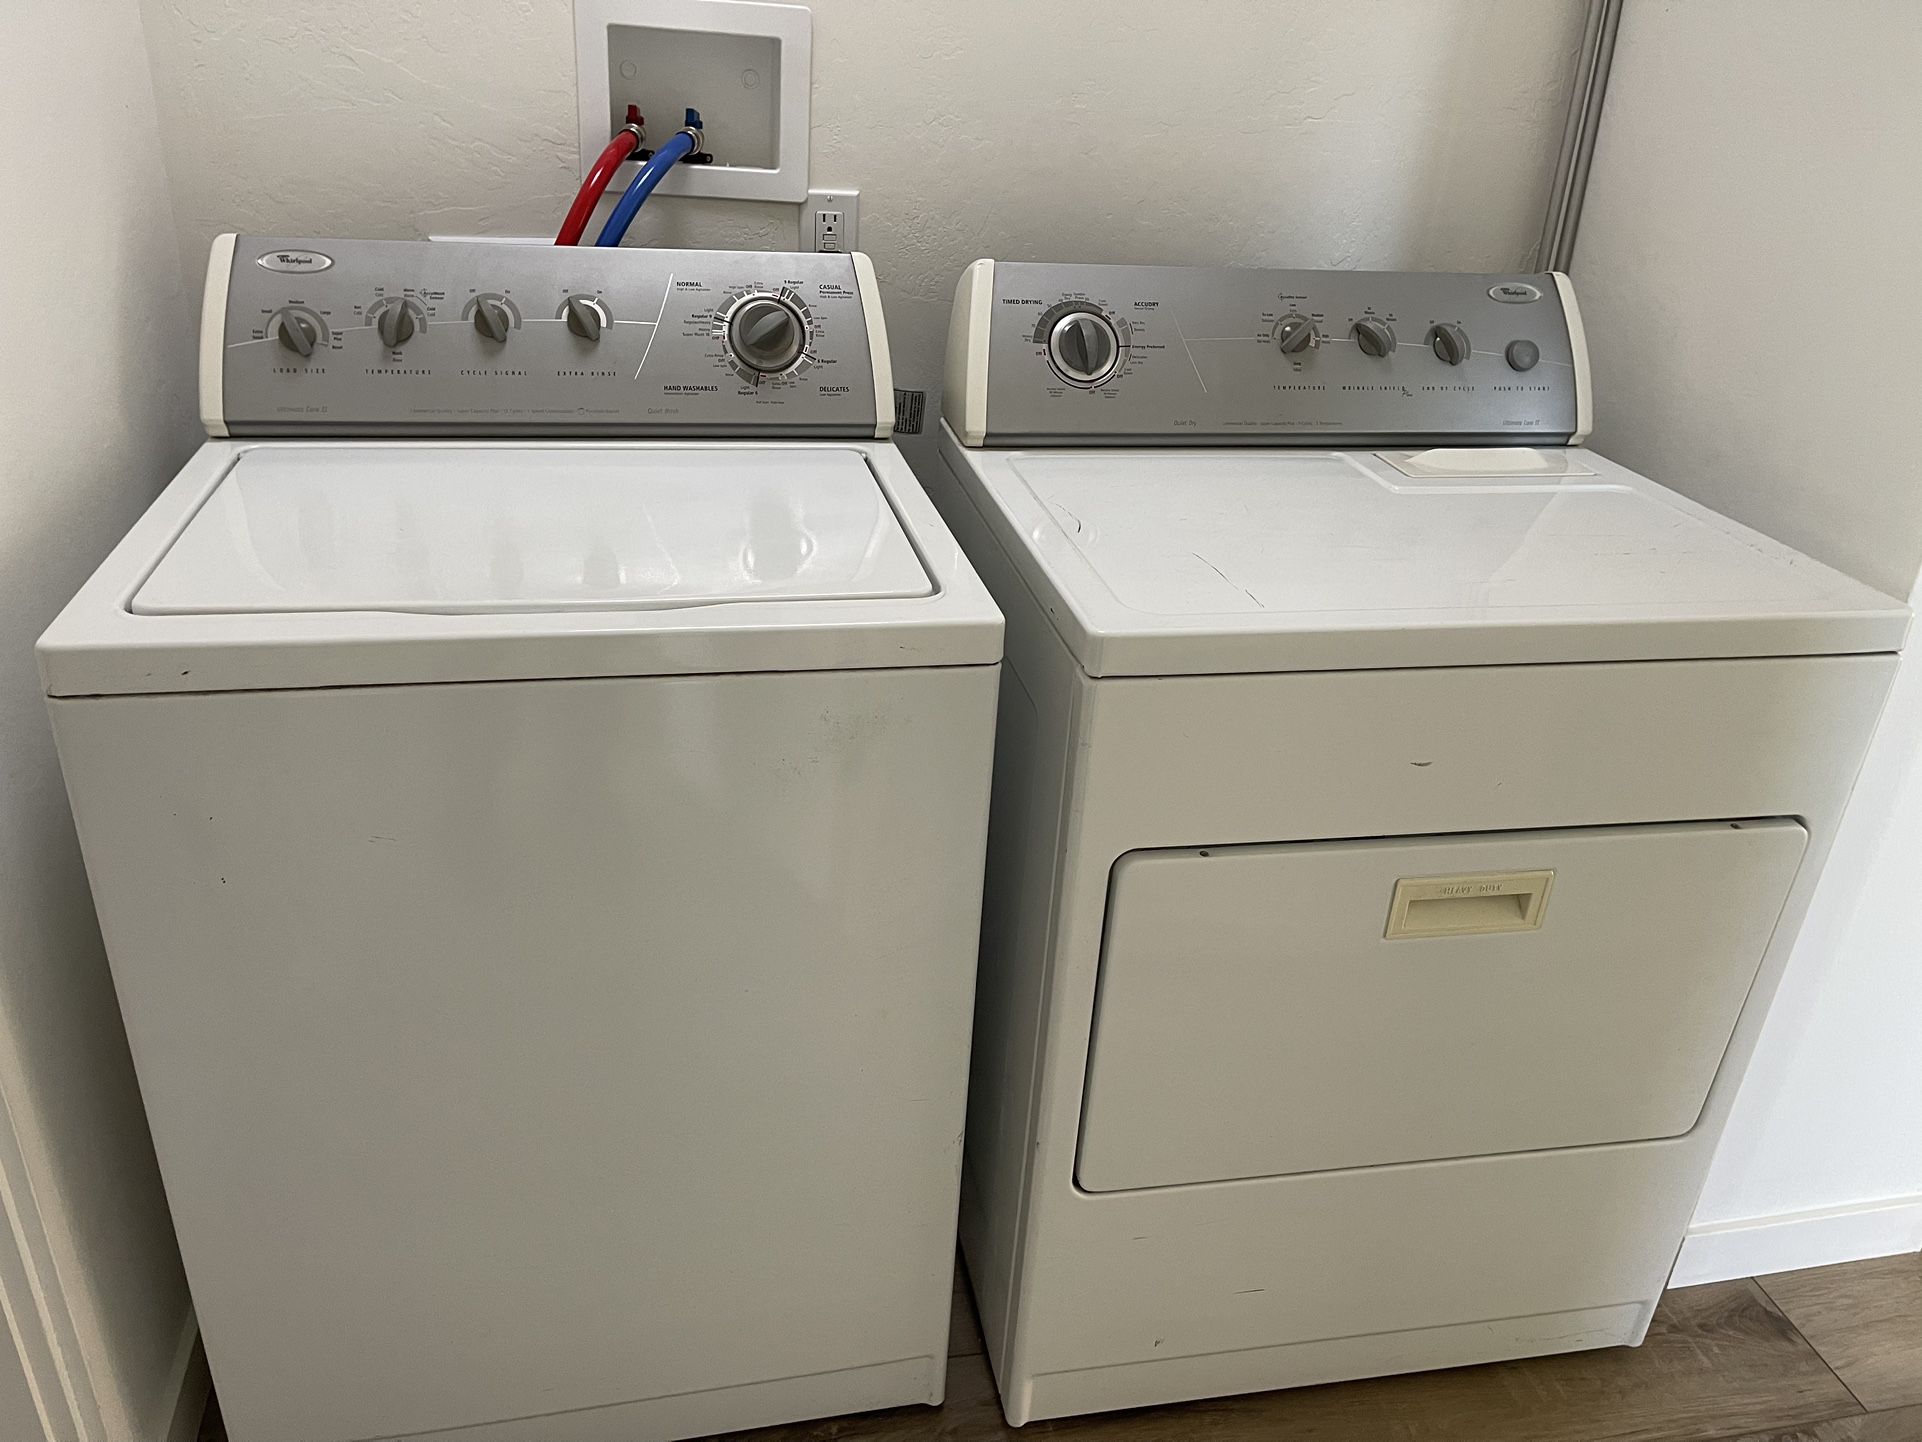 **Commercial-Grade Washer/Dryer Pair**